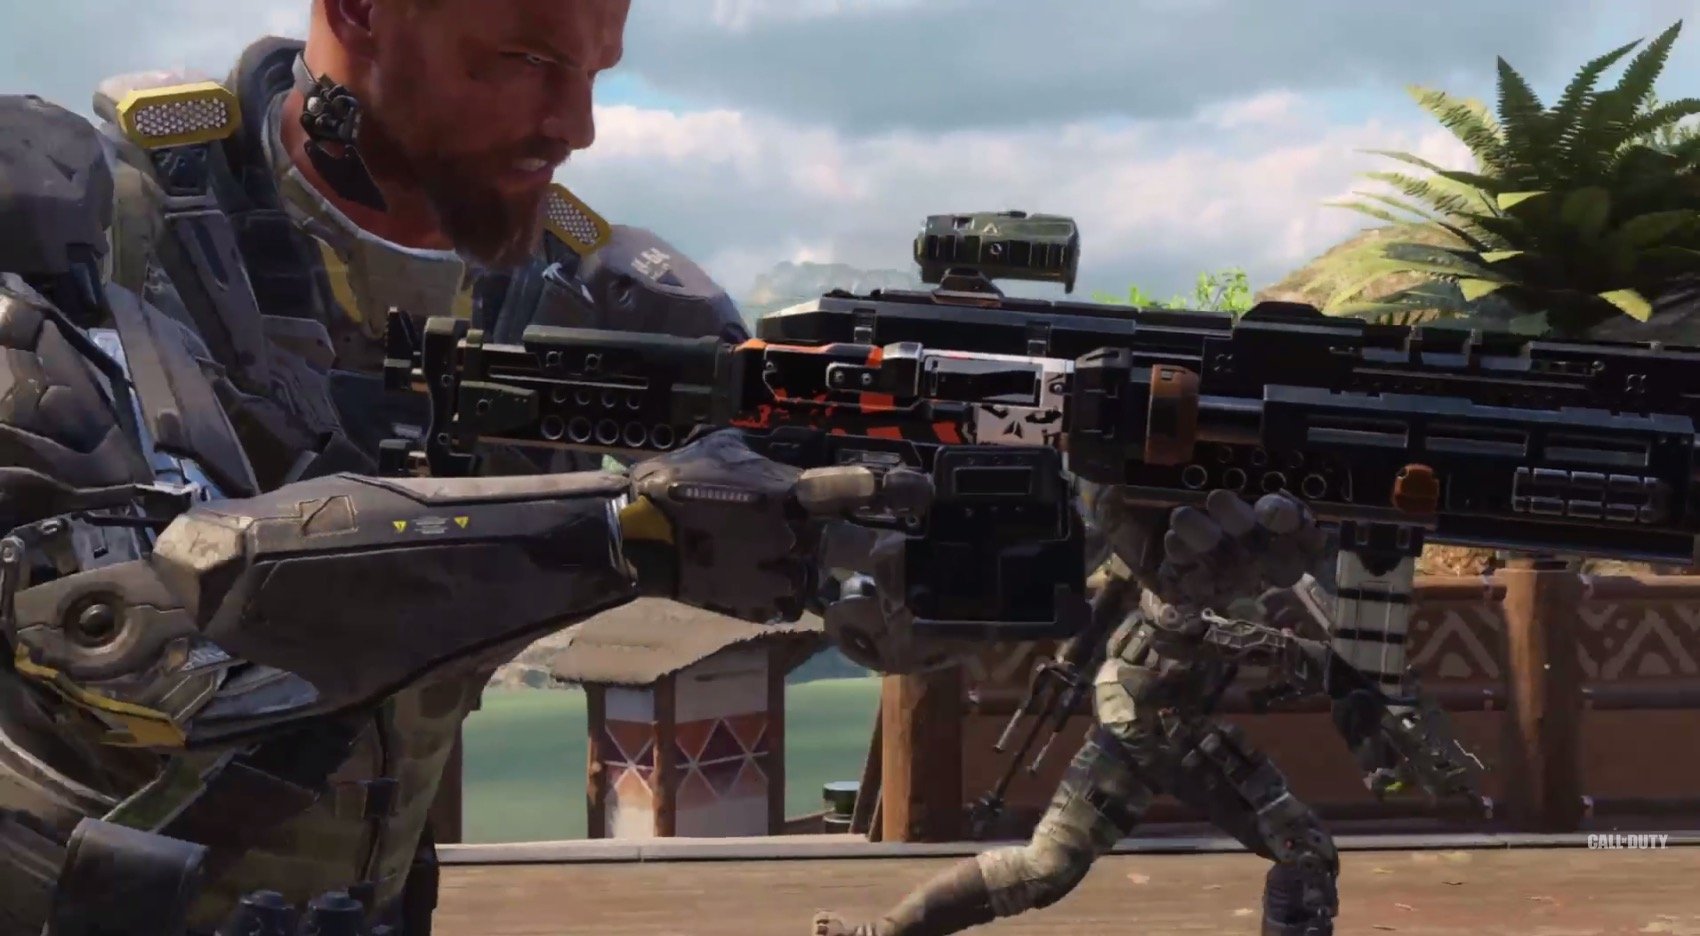 The Black Ops 3 Gunsmith editor offers customized loadouts and weapons.